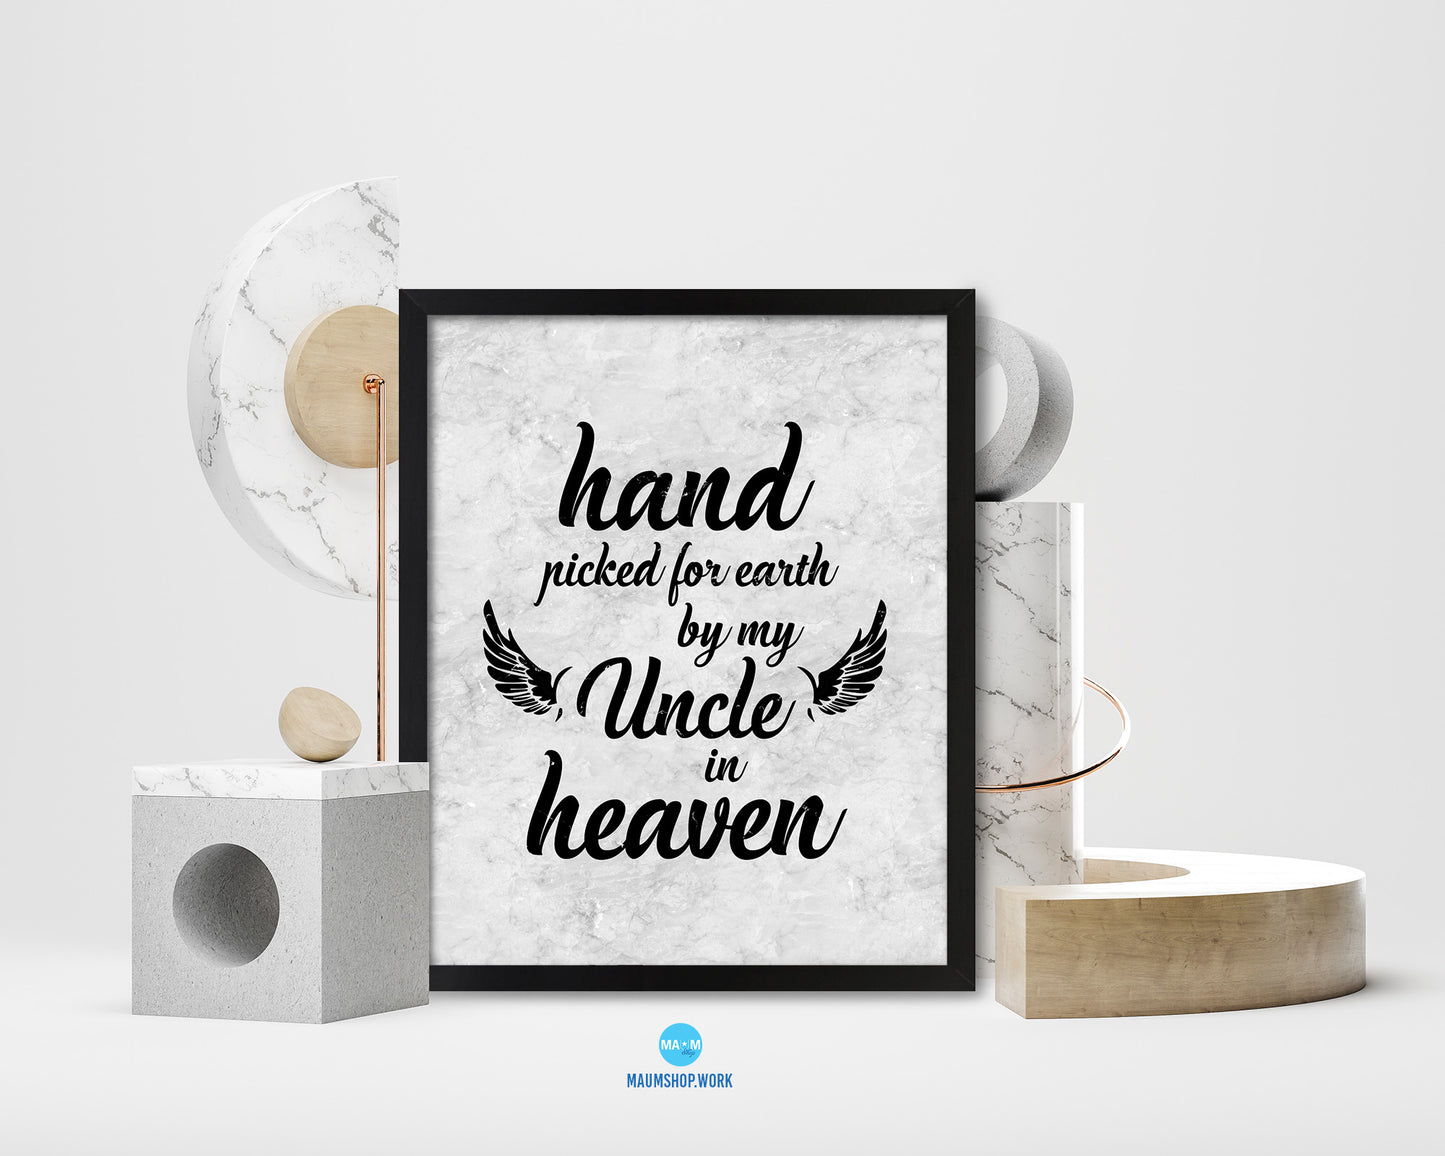 Hand picked for earth by our uncle in heaven Nursery Quote Framed Print Wall Art Decor Gifts